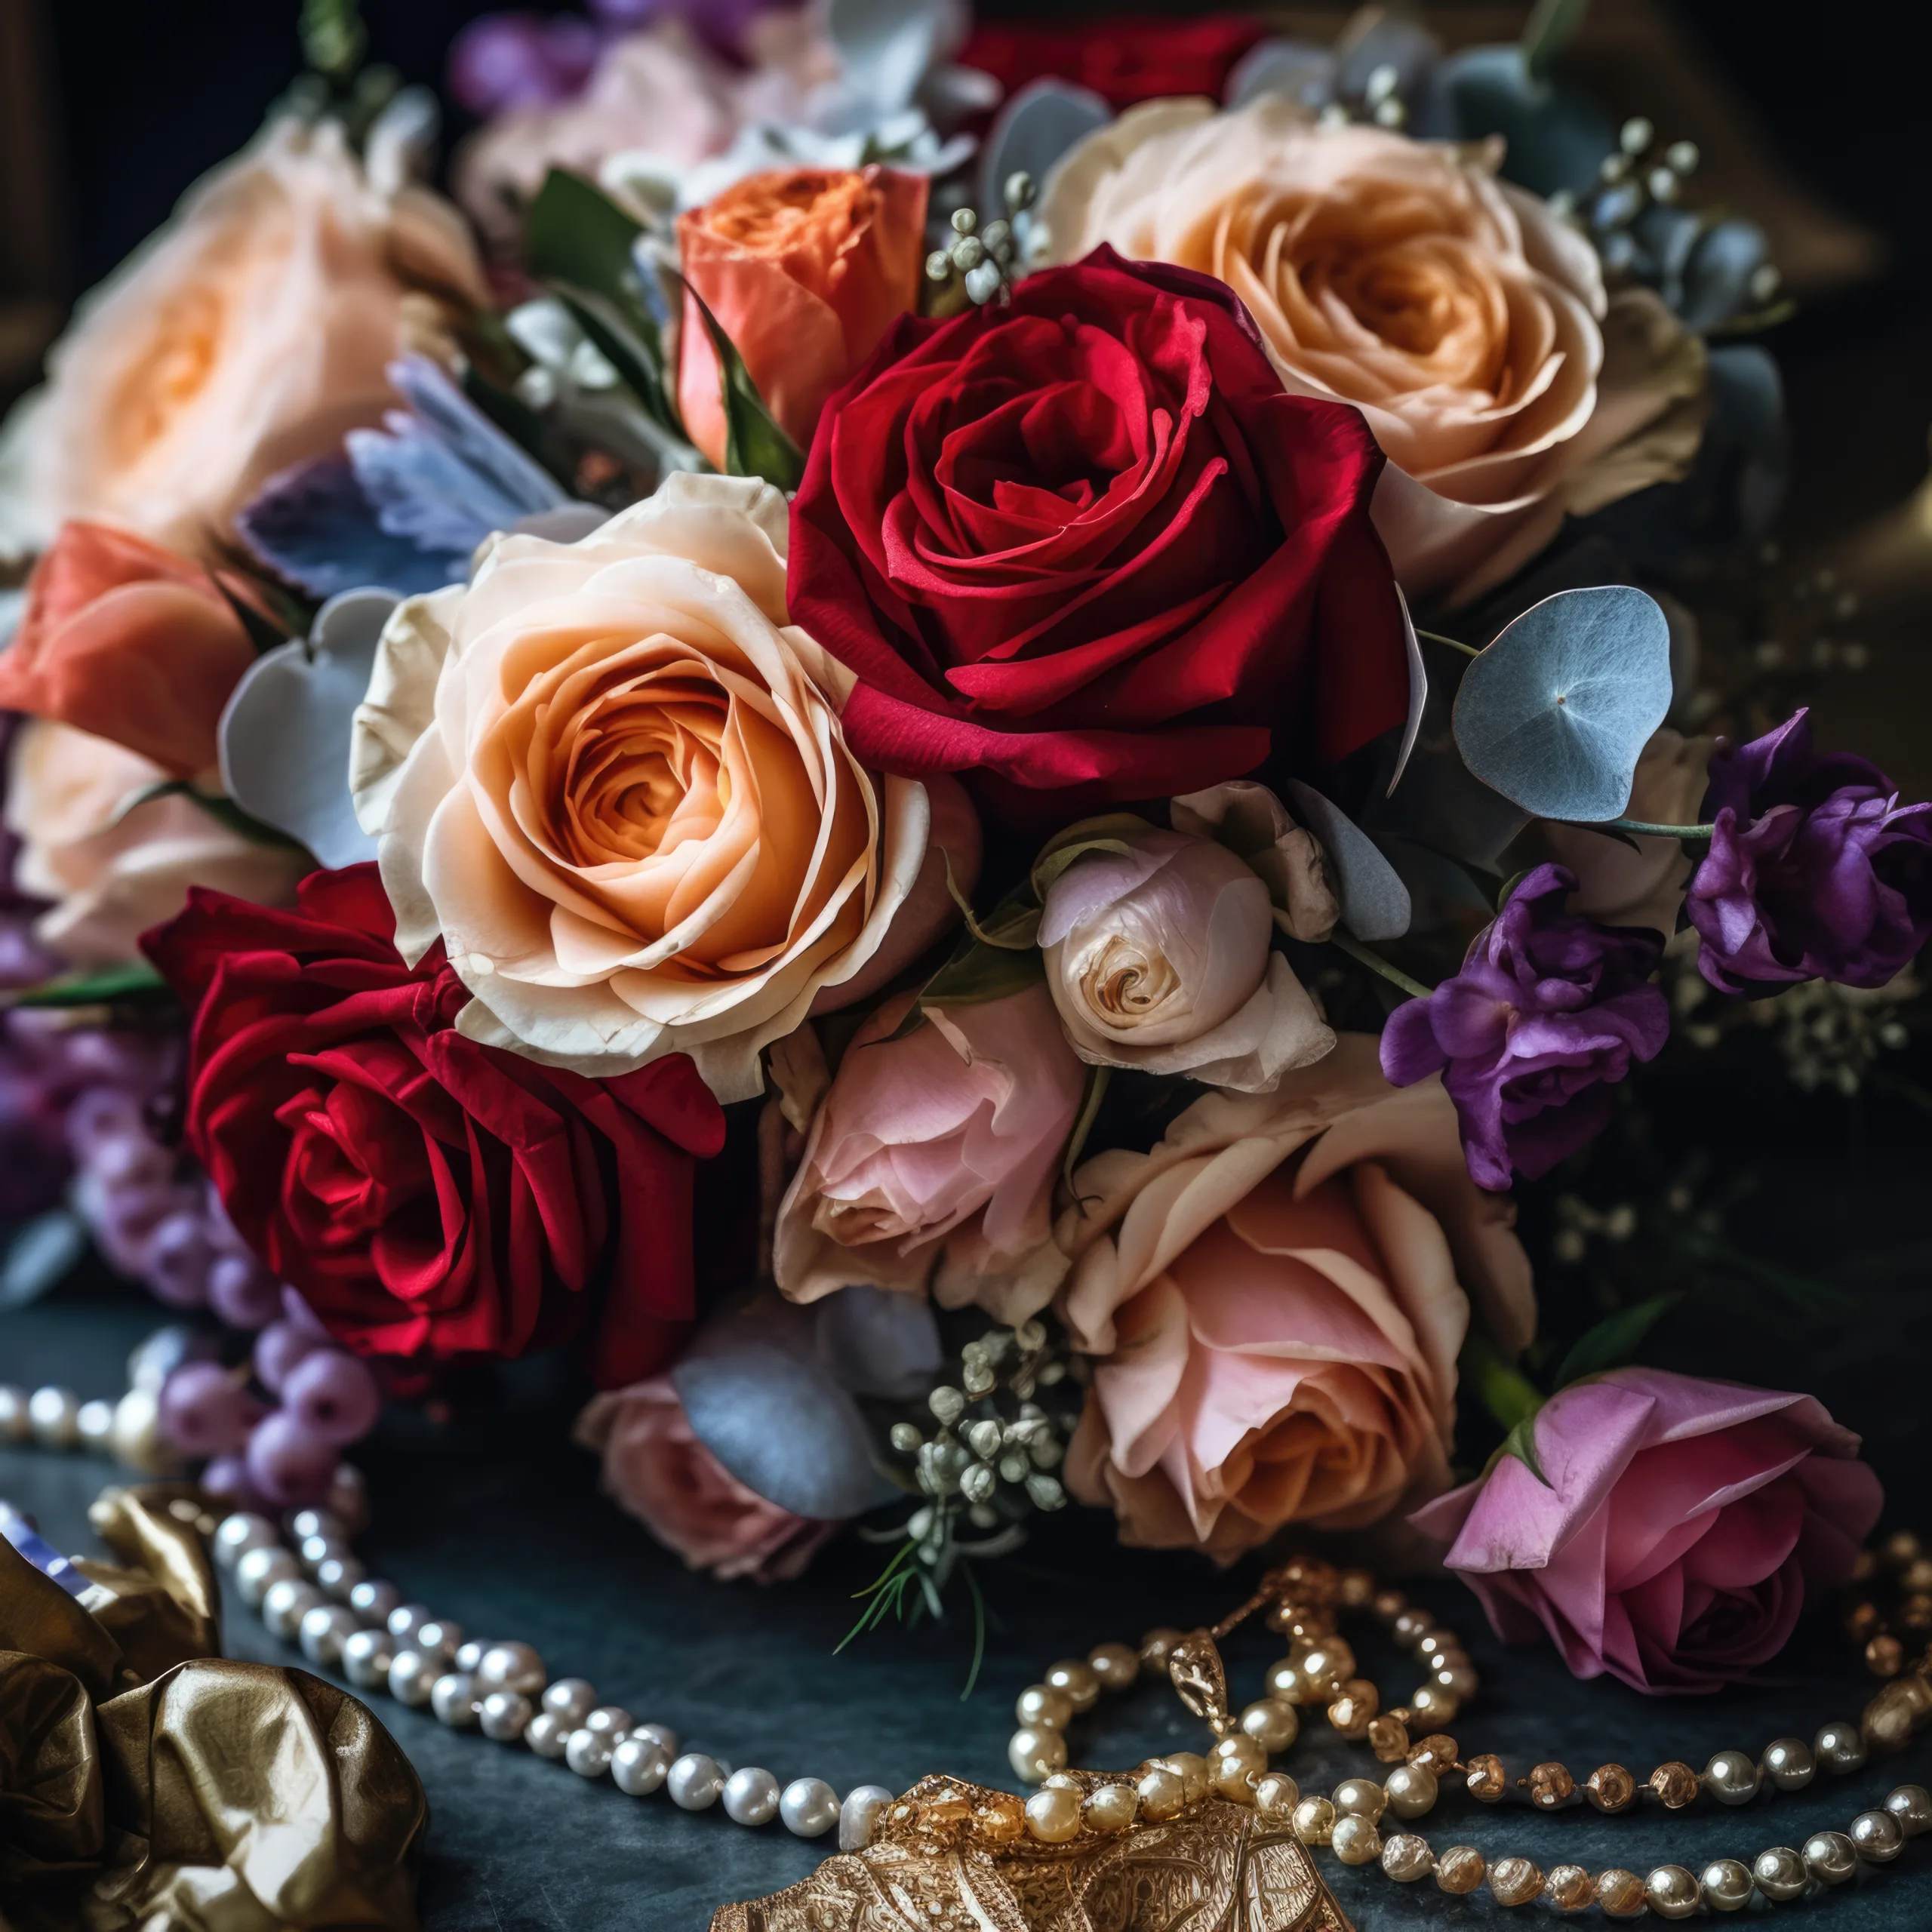 Wedding Photographer Farleigh House:A bouquet of roses and pearls on a table.